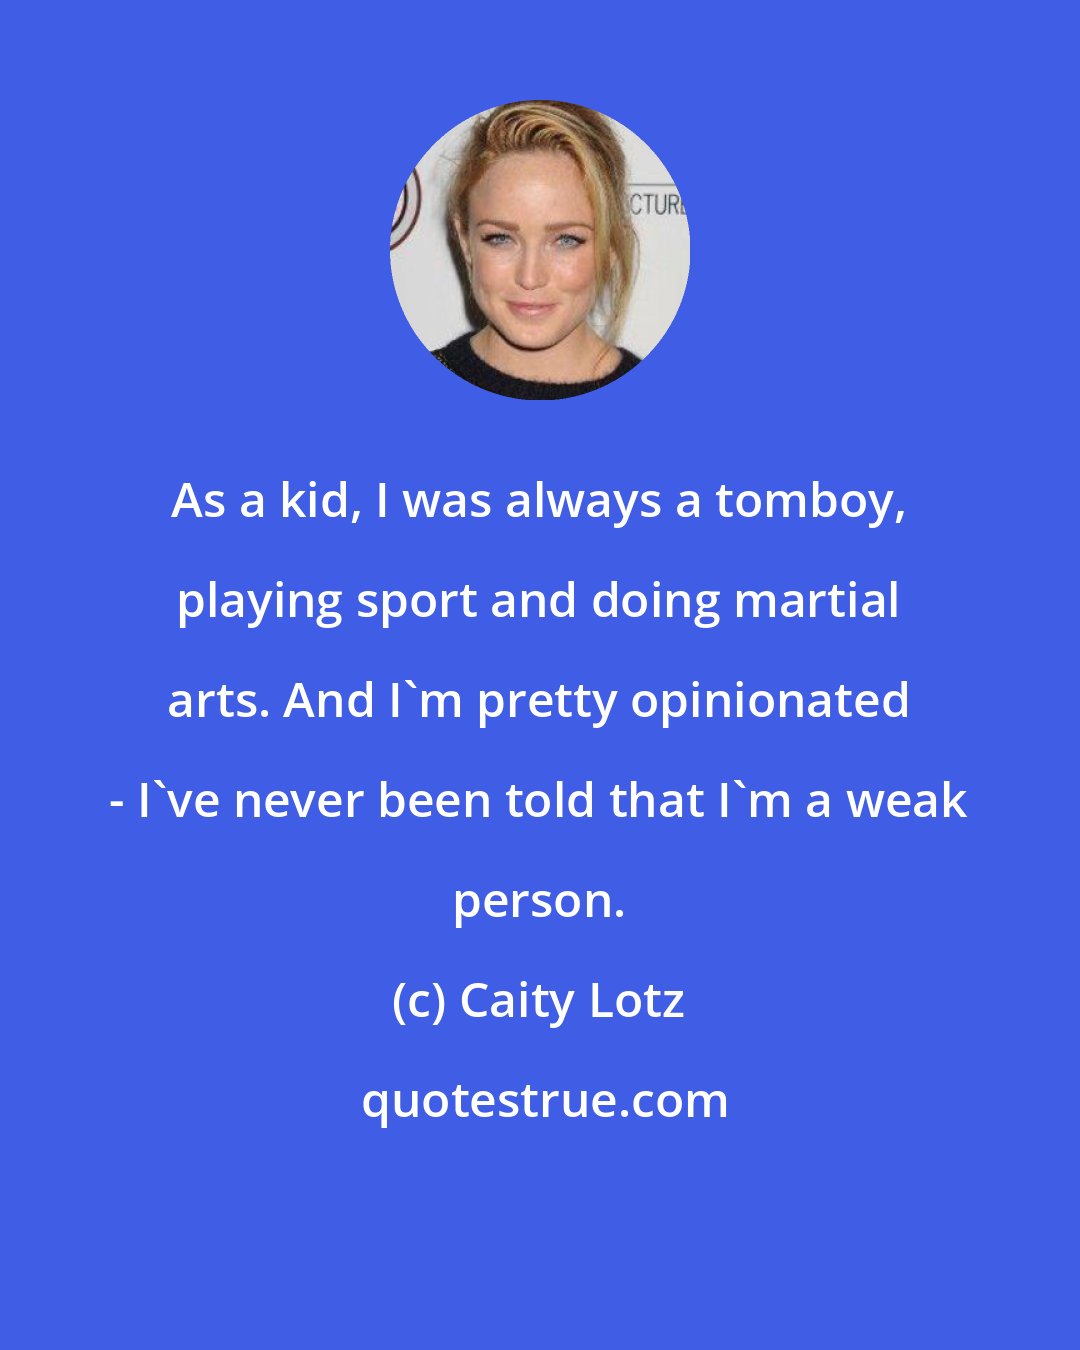 Caity Lotz: As a kid, I was always a tomboy, playing sport and doing martial arts. And I'm pretty opinionated - I've never been told that I'm a weak person.